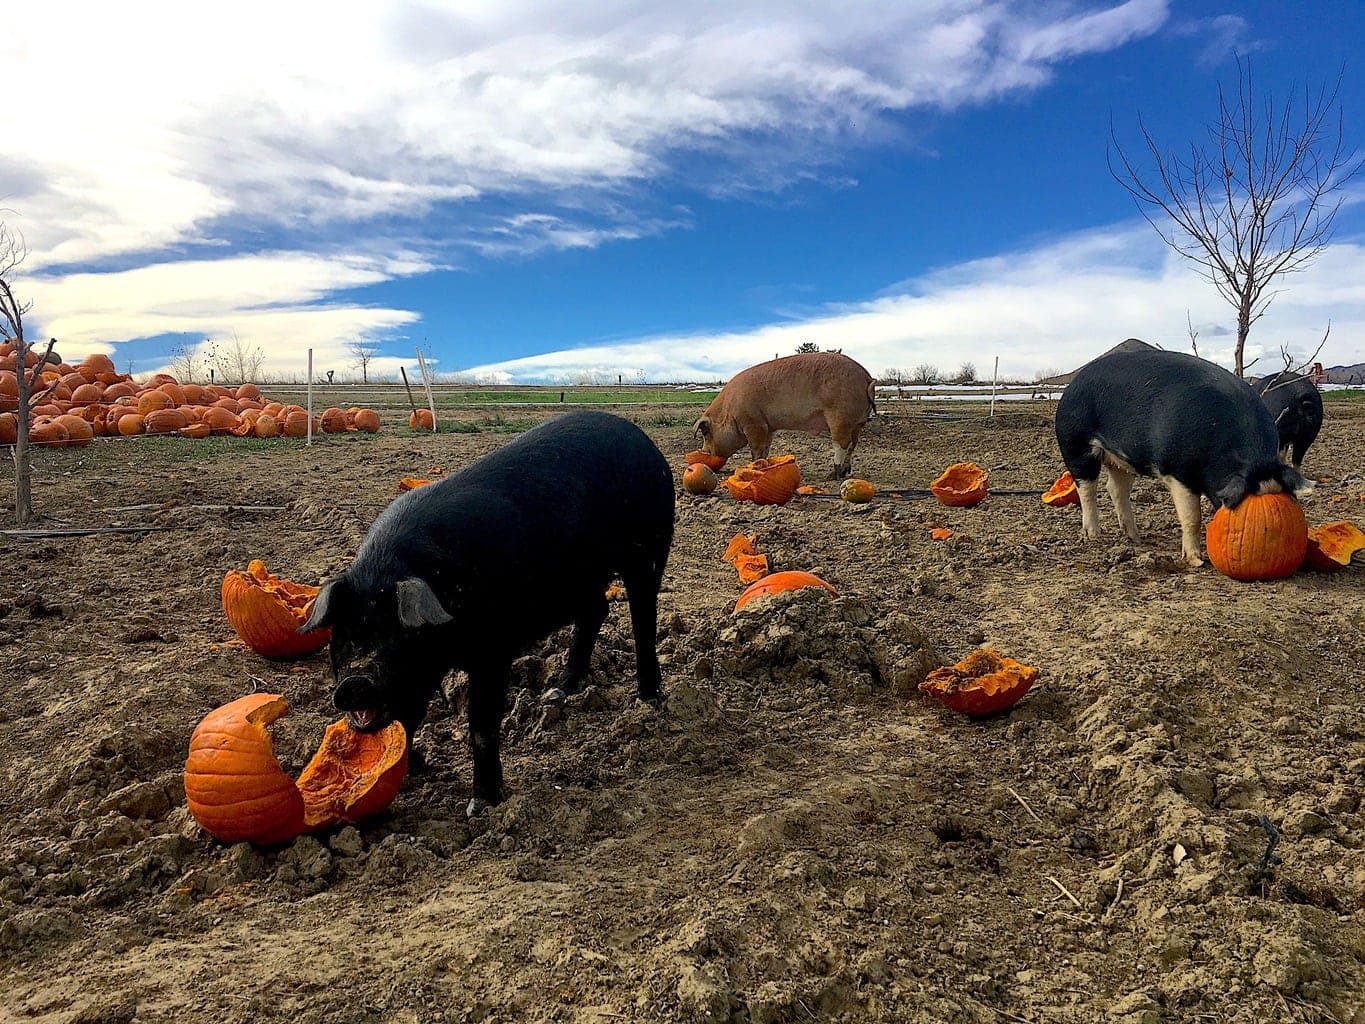 Pigs are central to the farm-to-table operation at Black Cat Farm.